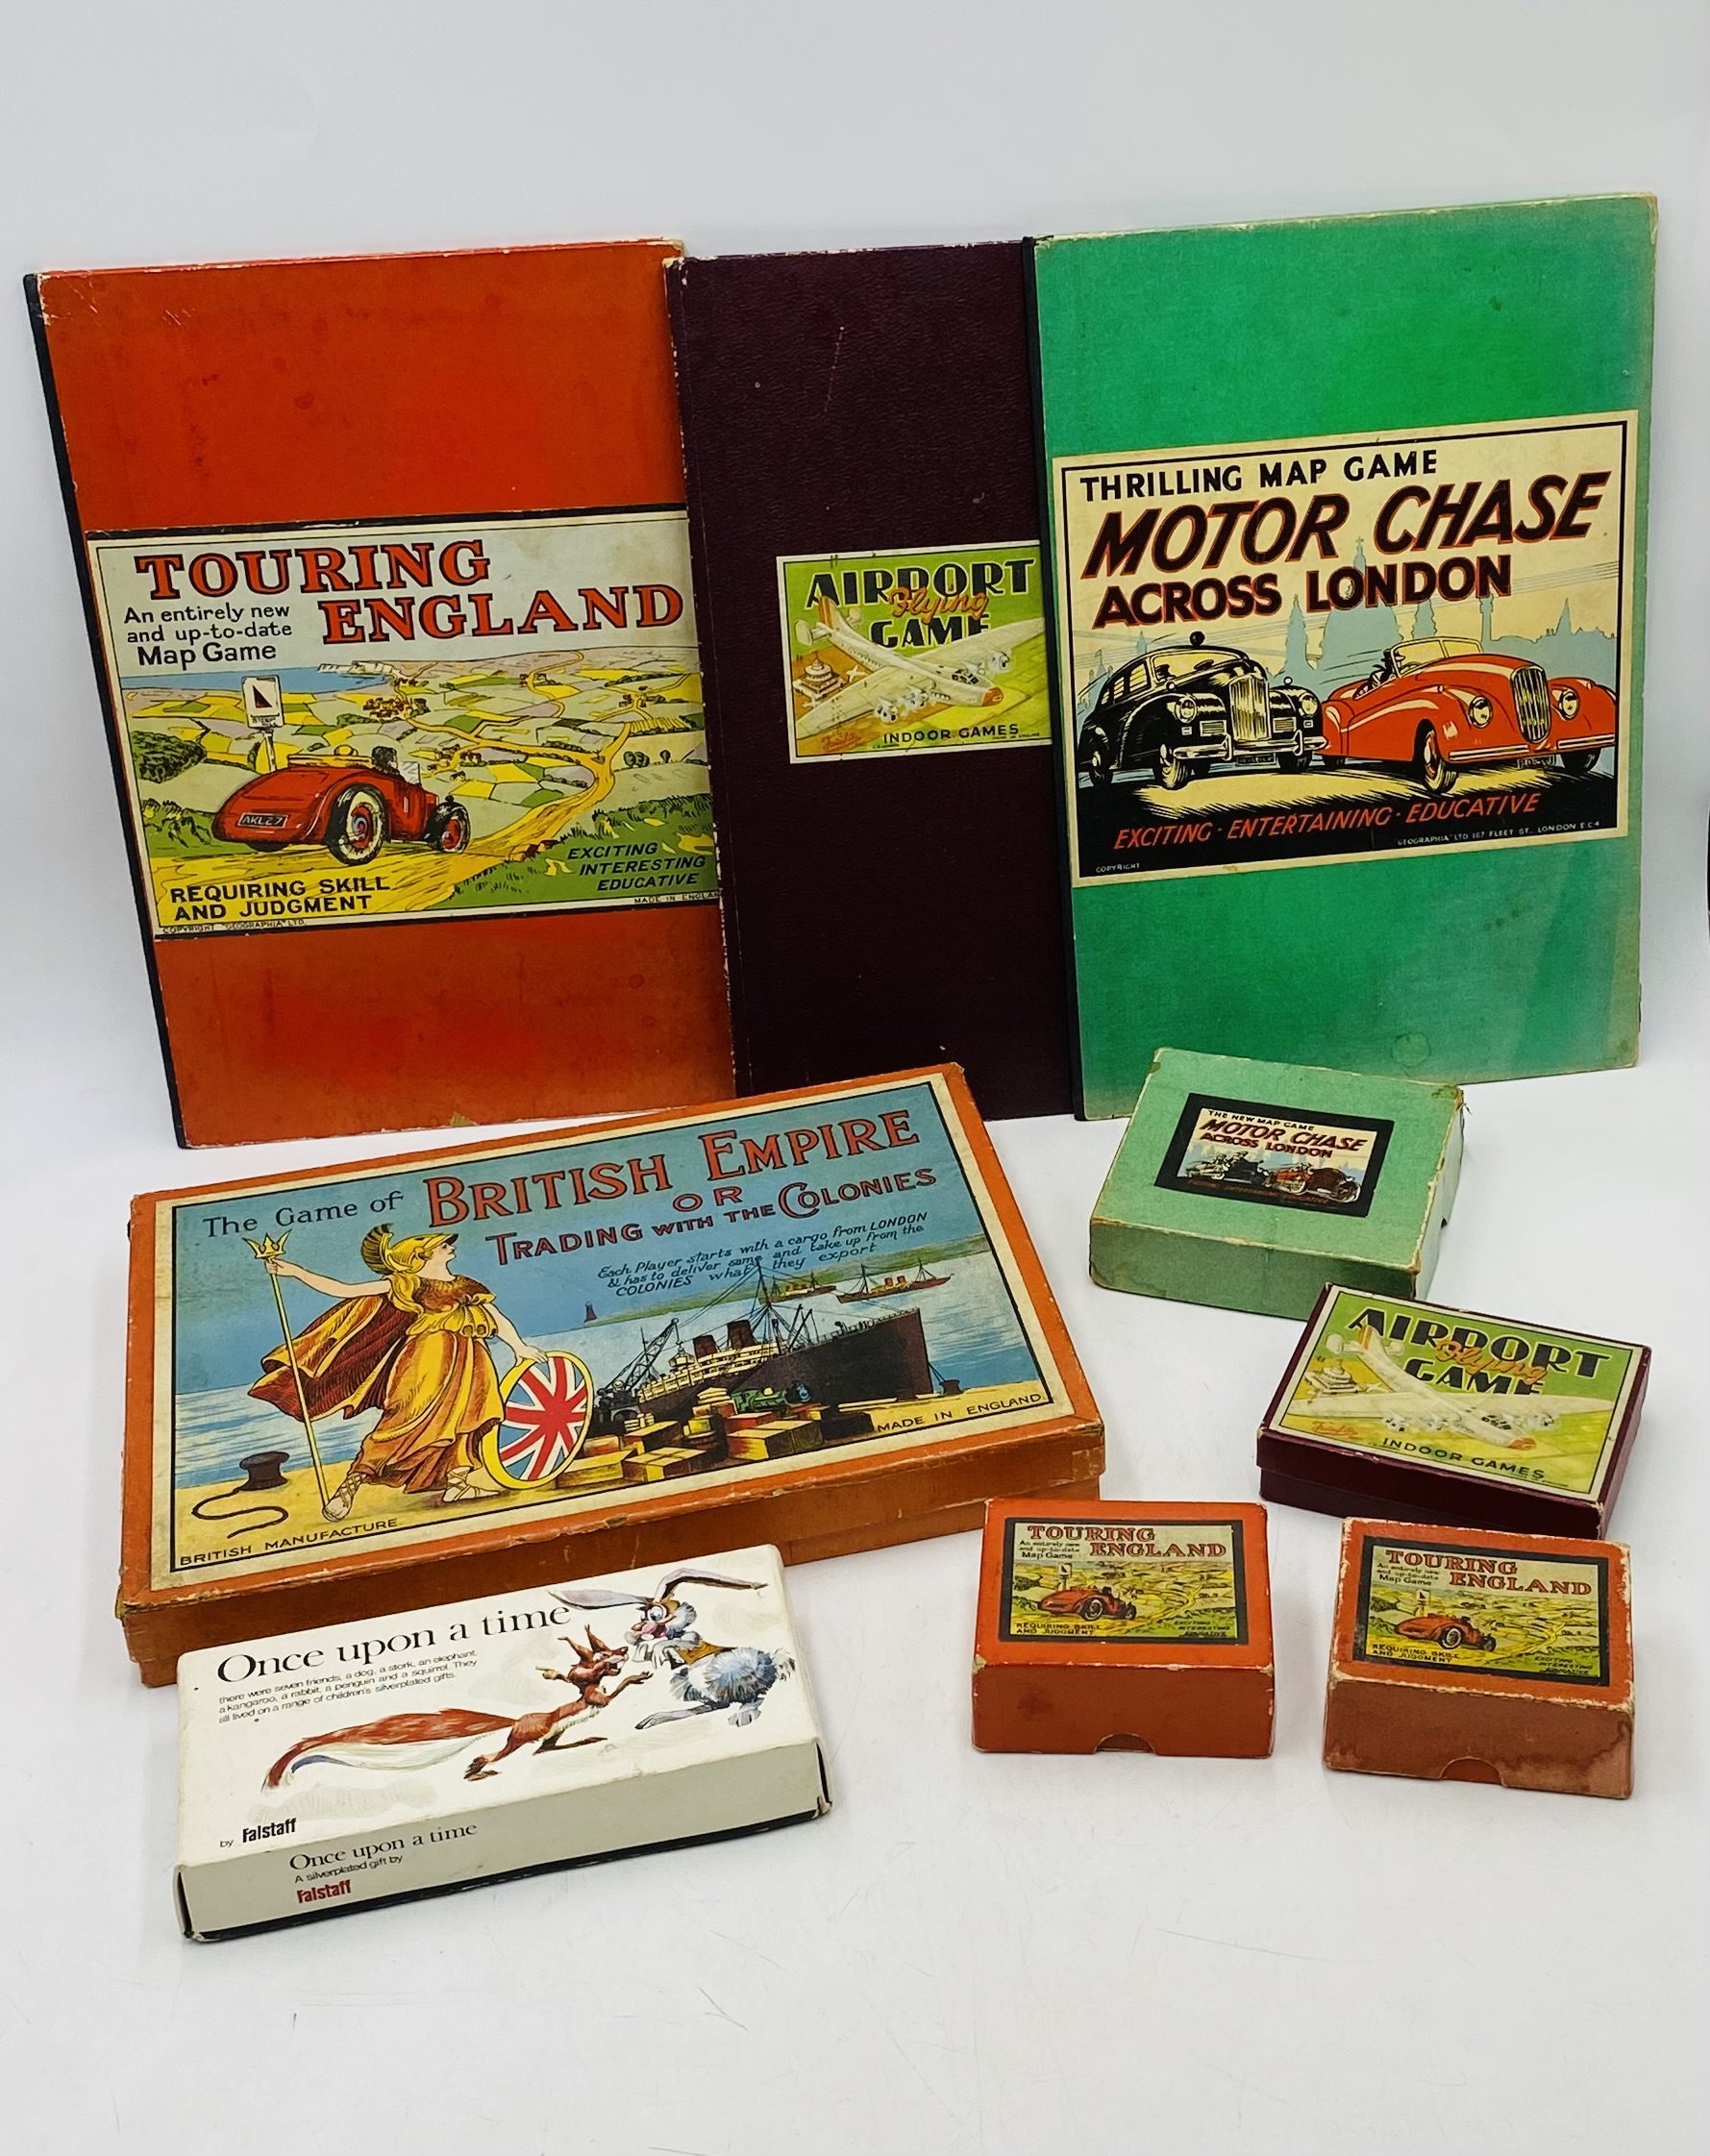 A collection of vintage games relating to transport, including Motor Chase Across London, Touring